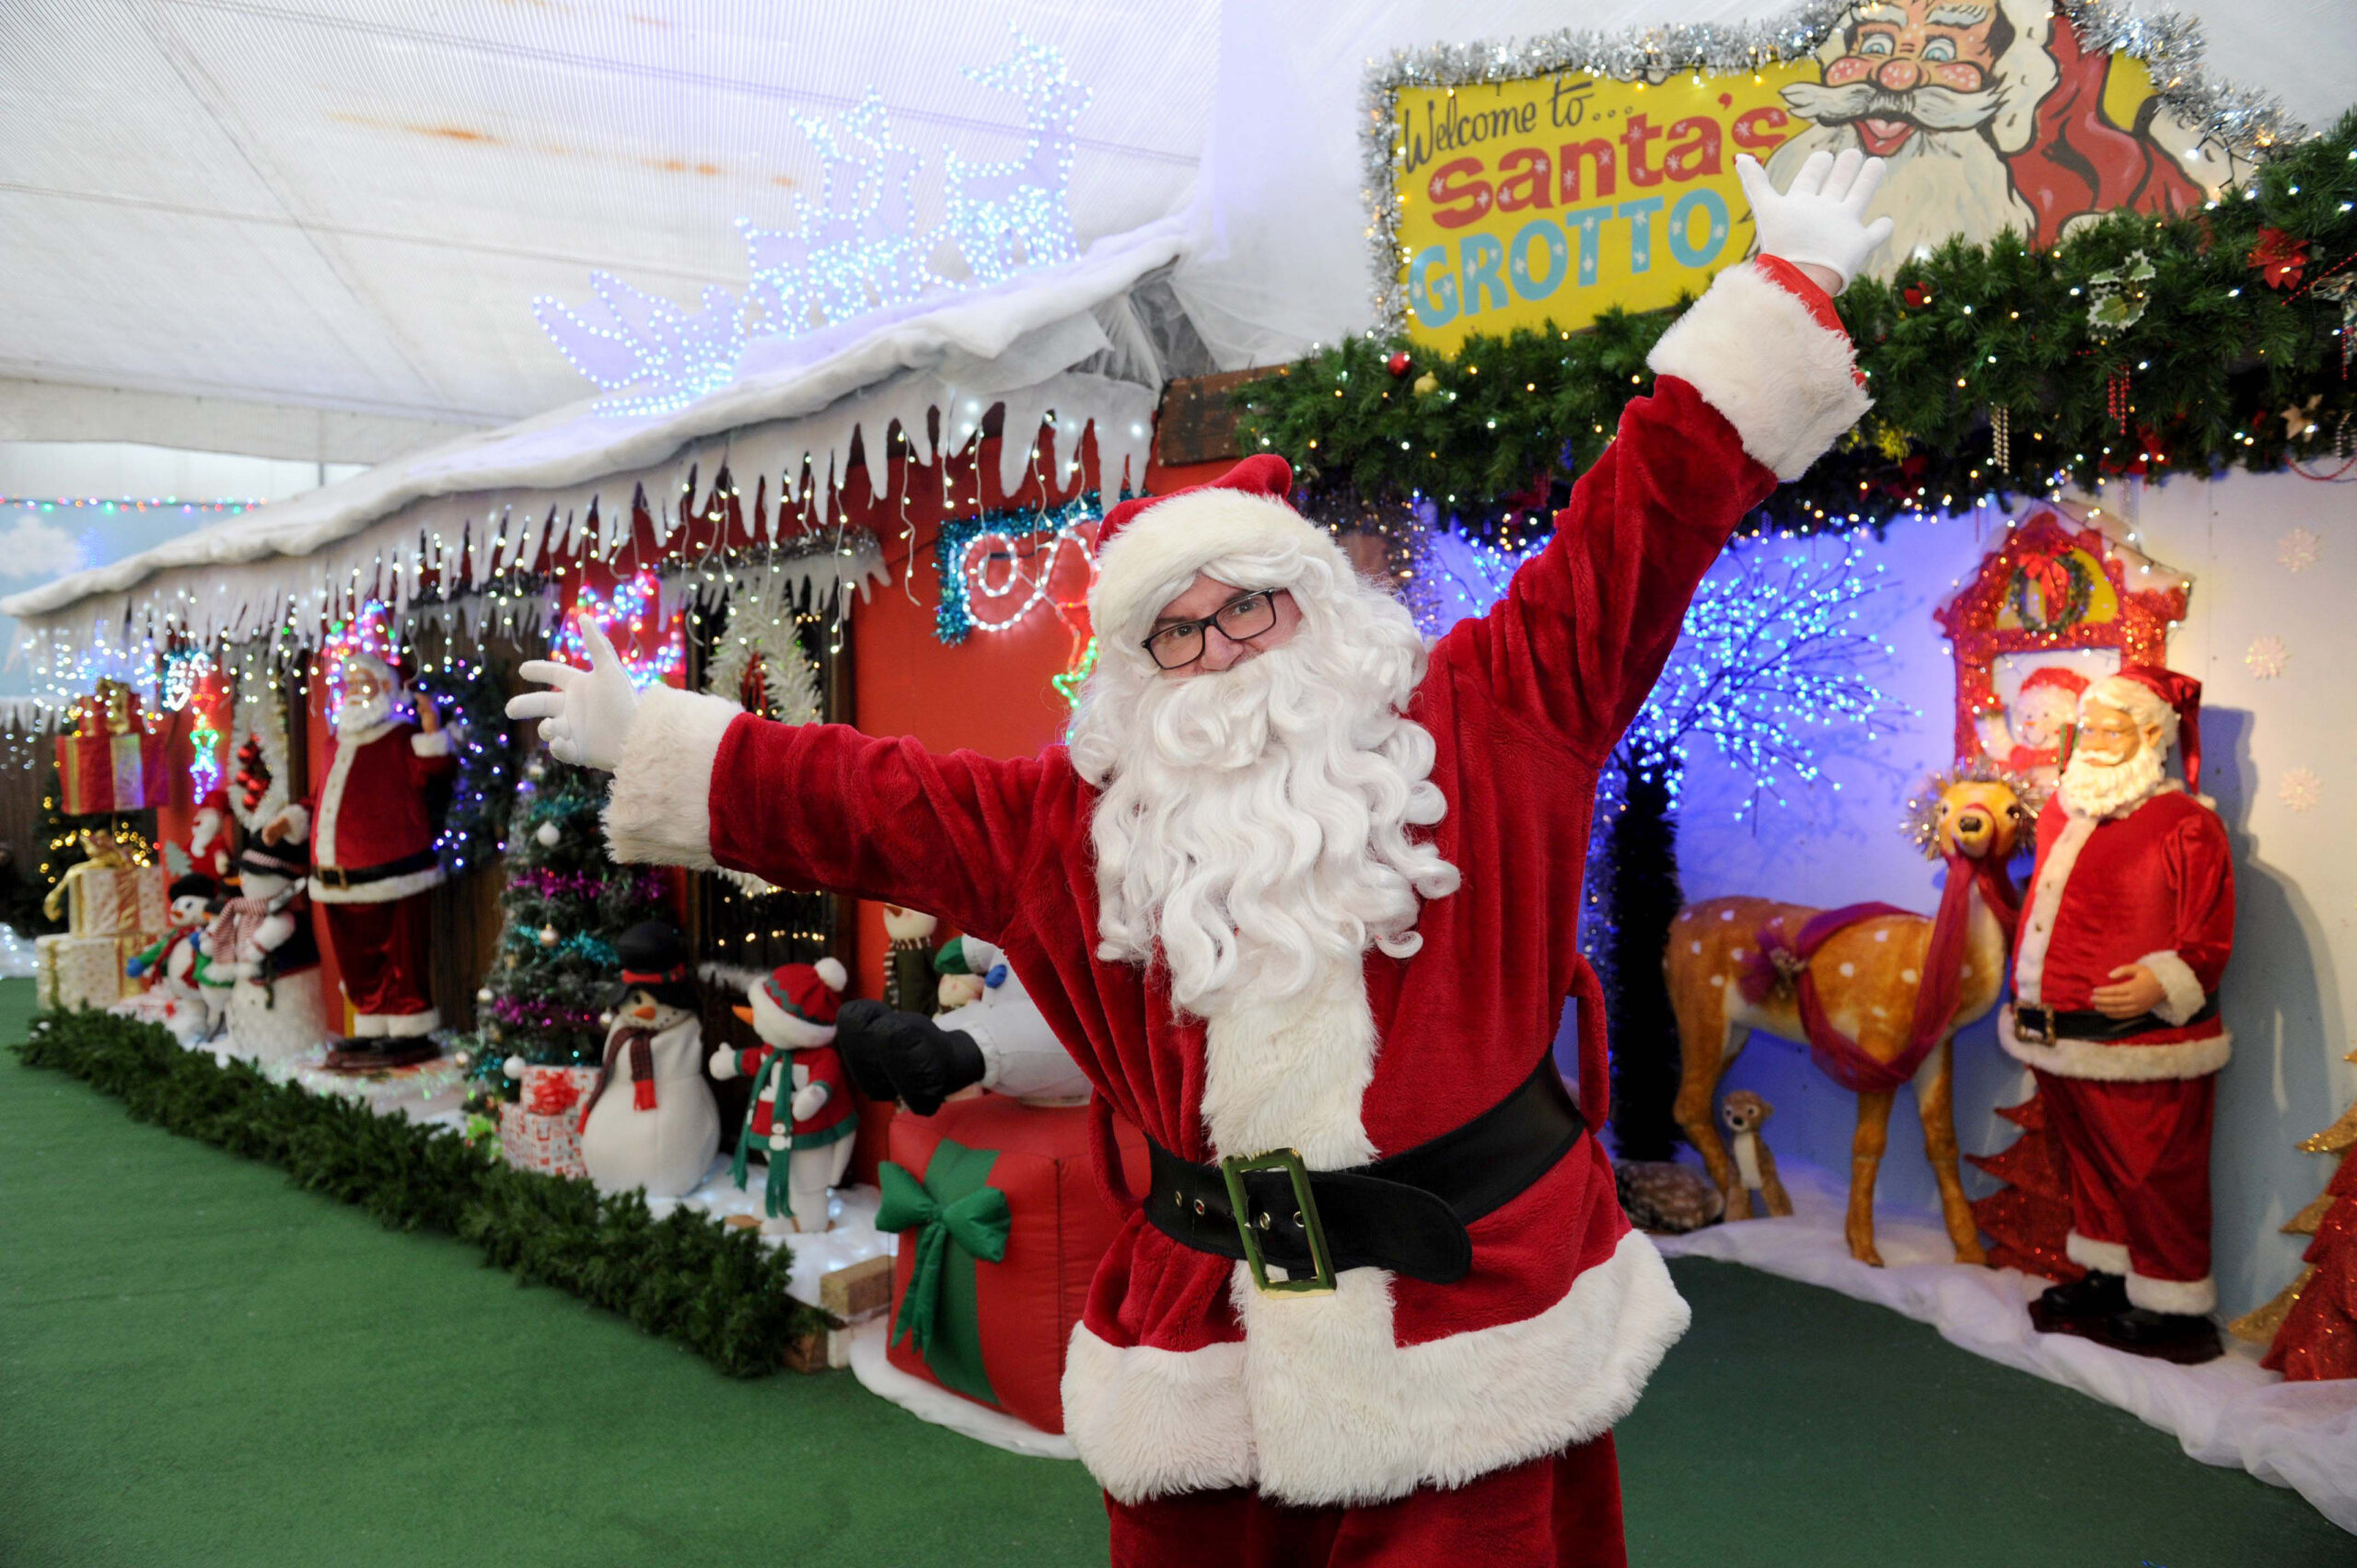 Santa Claus will be at Cardwell in his Grotto to meet the children